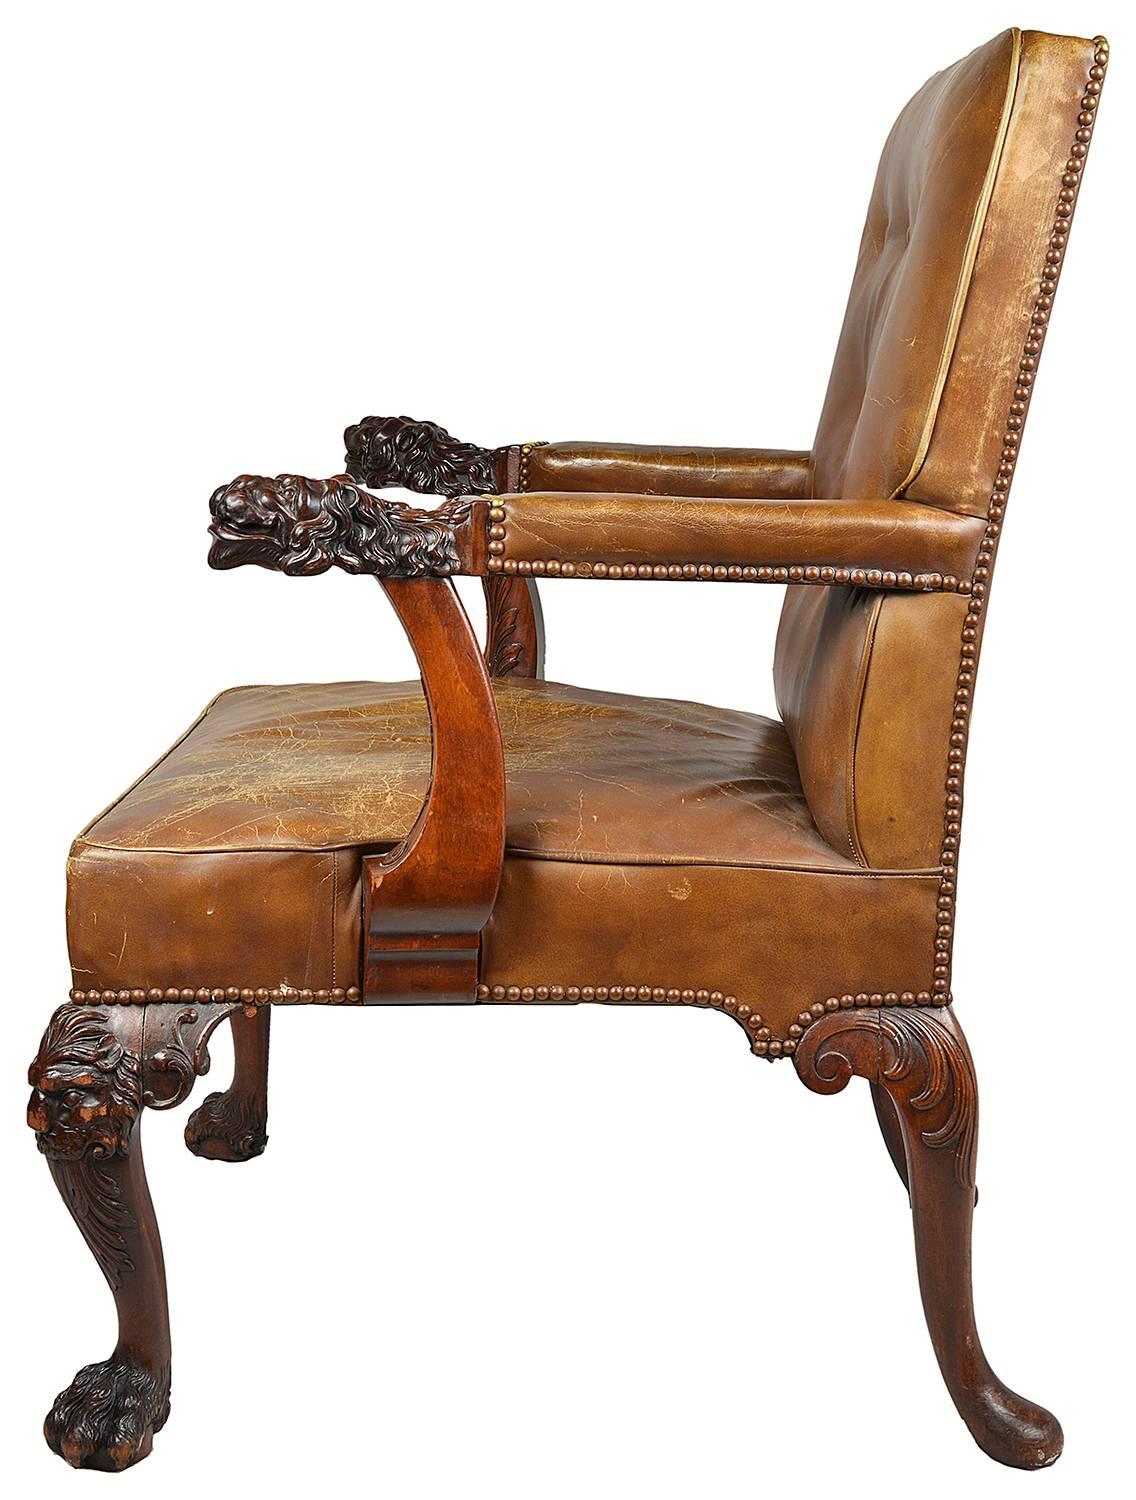 A very good quality late 19th century Chippendale influenced mahogany desk / armchair. Have wonderful faded leather upholstery. Carved mythical lion masks to the arm rests and raised on carved Lion mask cabriole legs terminating in carved claw feet.